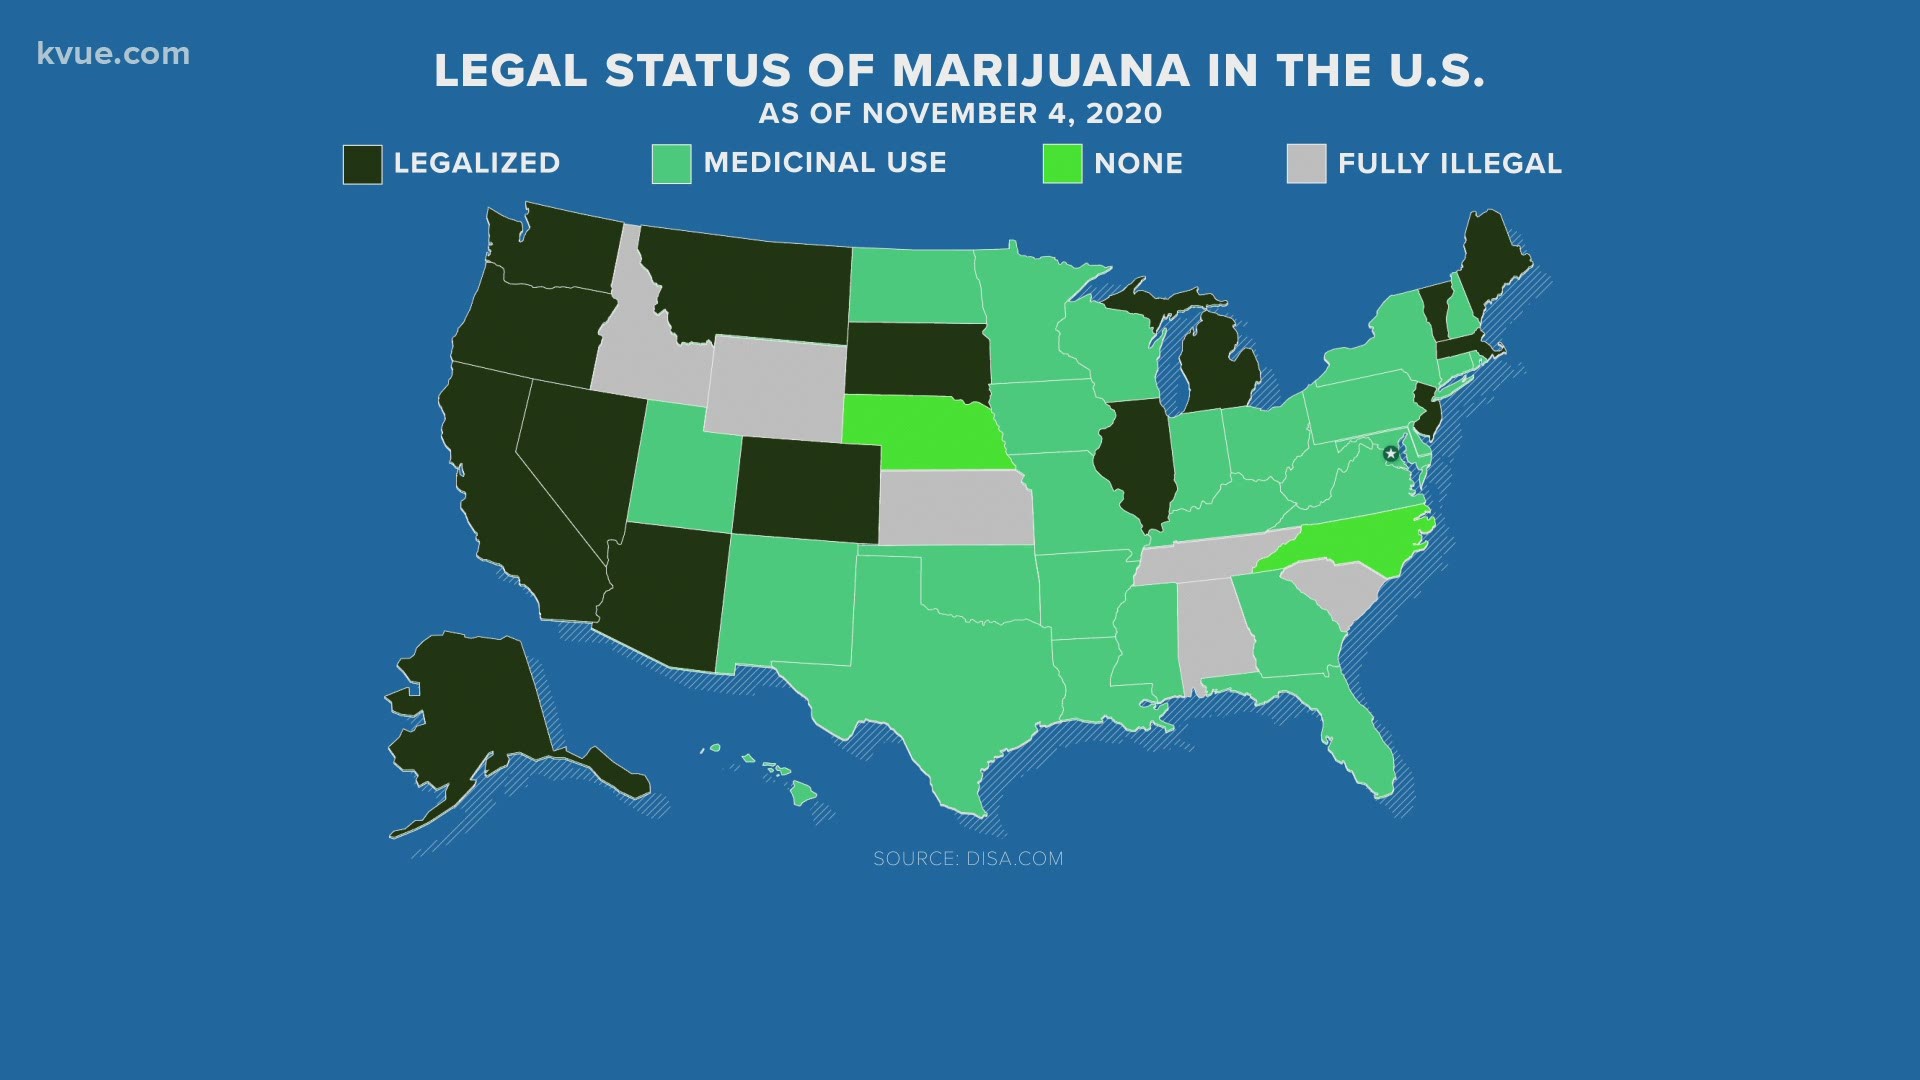 Friday's historic vote comes as more states have legalized recreational marijuana use.